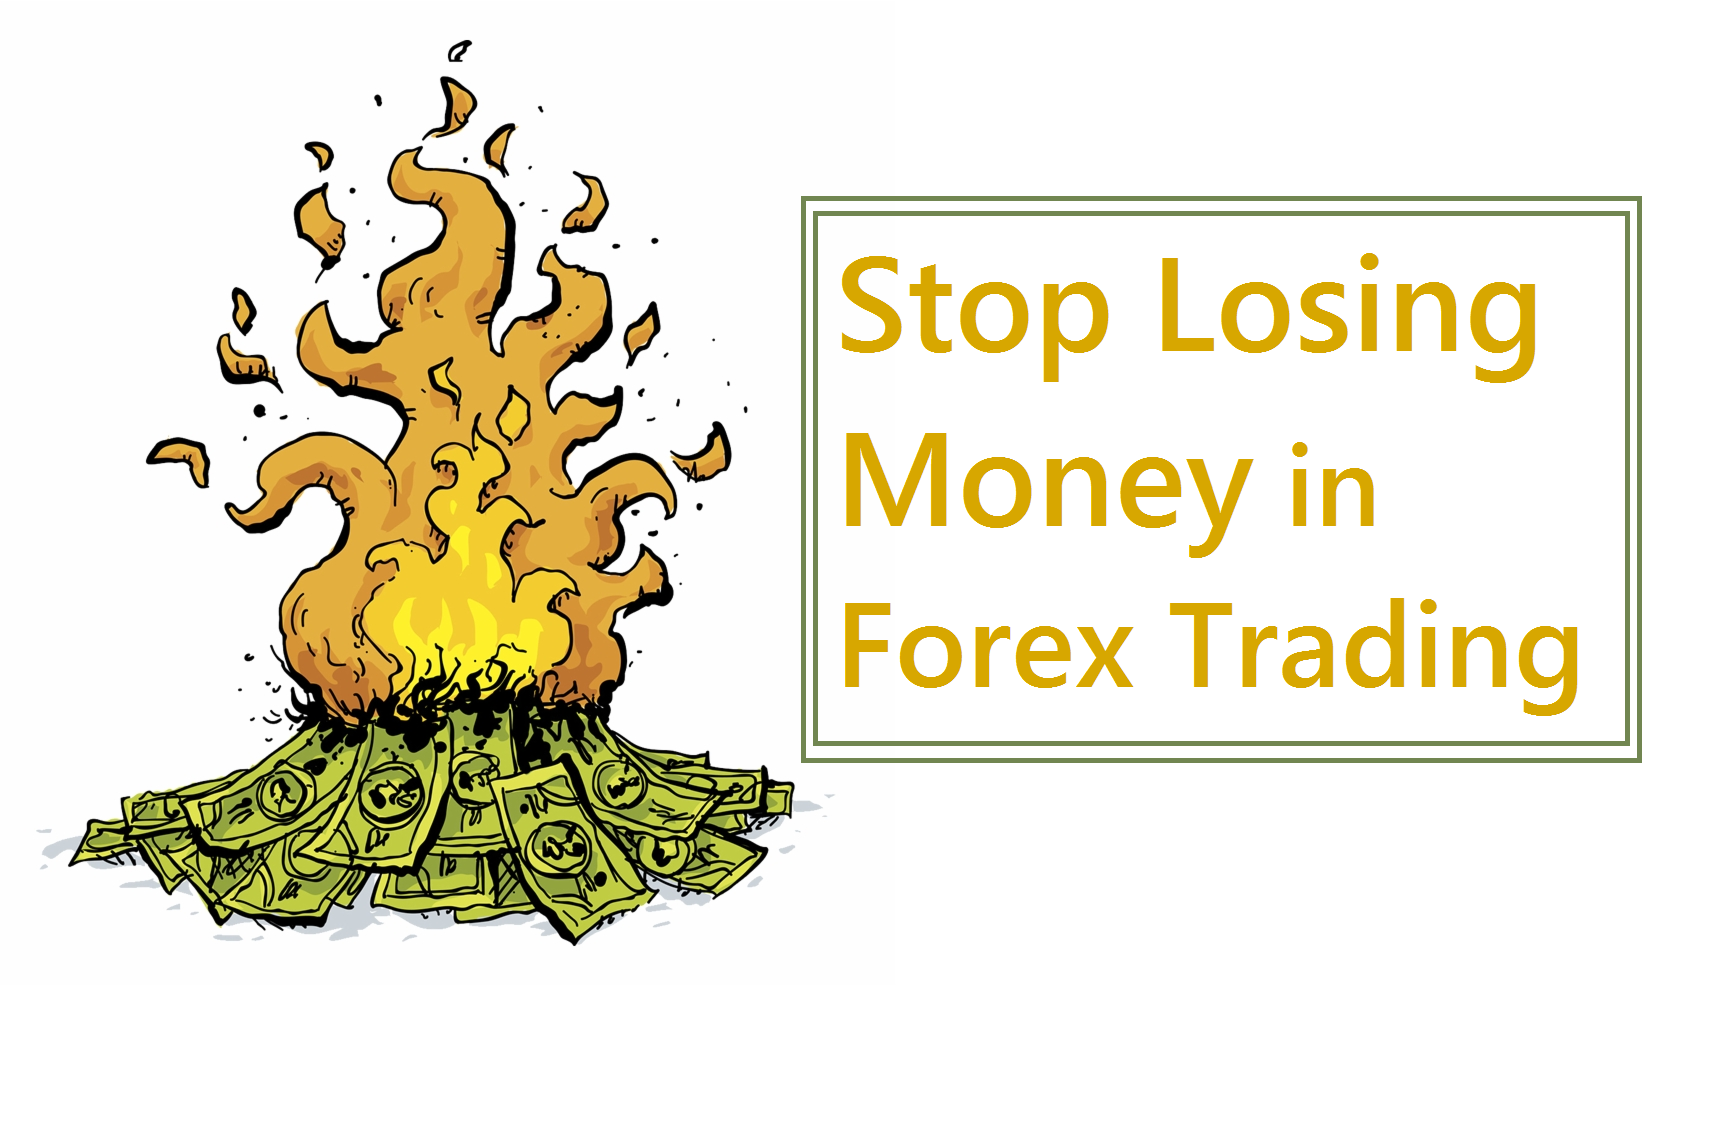 How to Stop Losing Money in Forex Trading